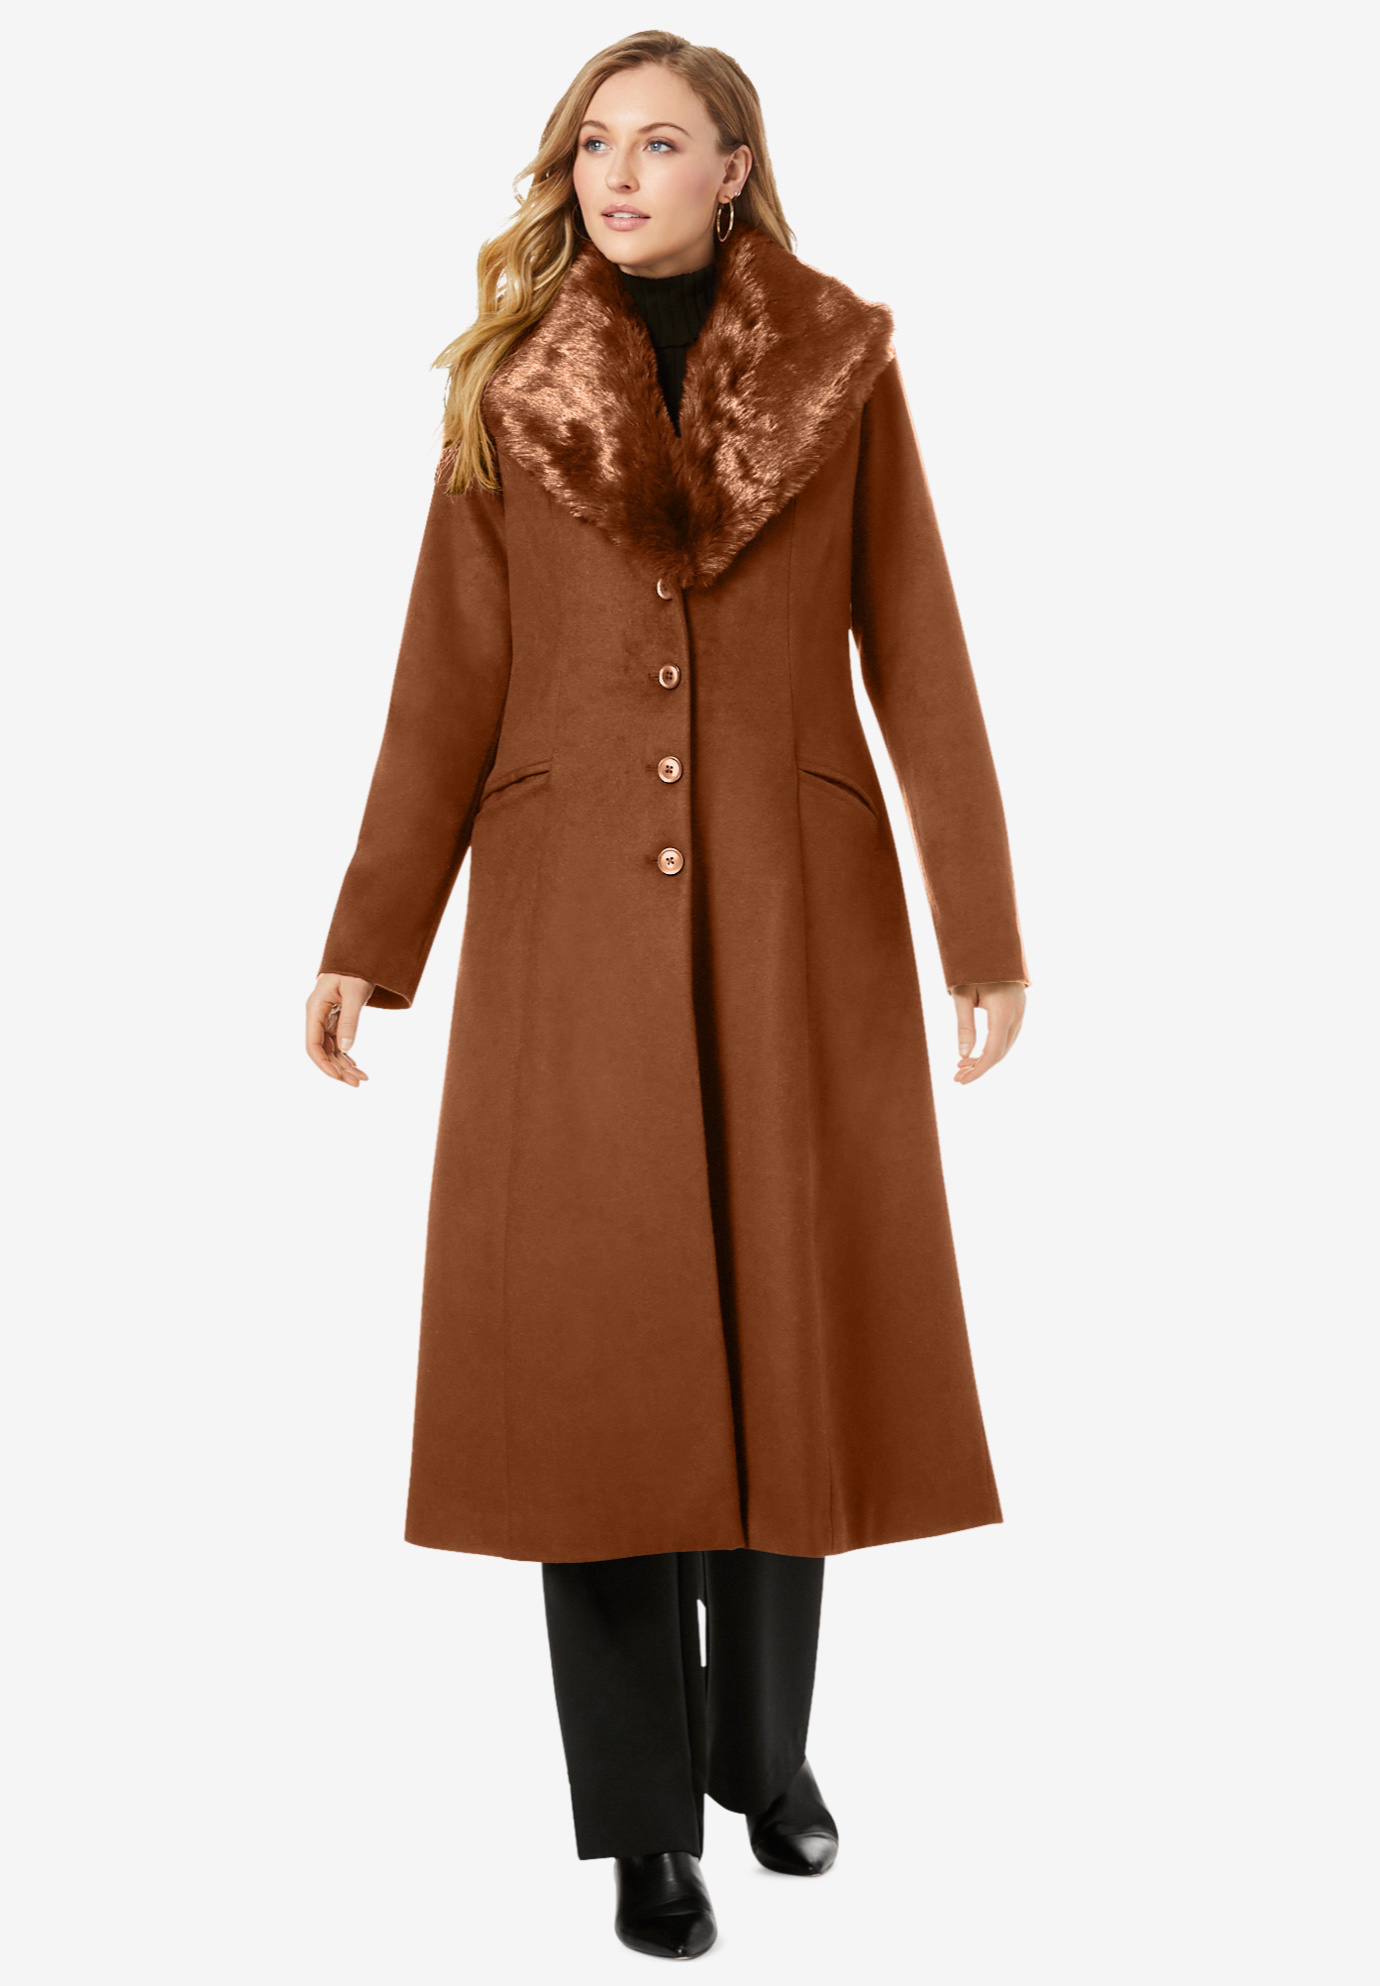 Long Wool-Blend Coat with Faux Fur Collar